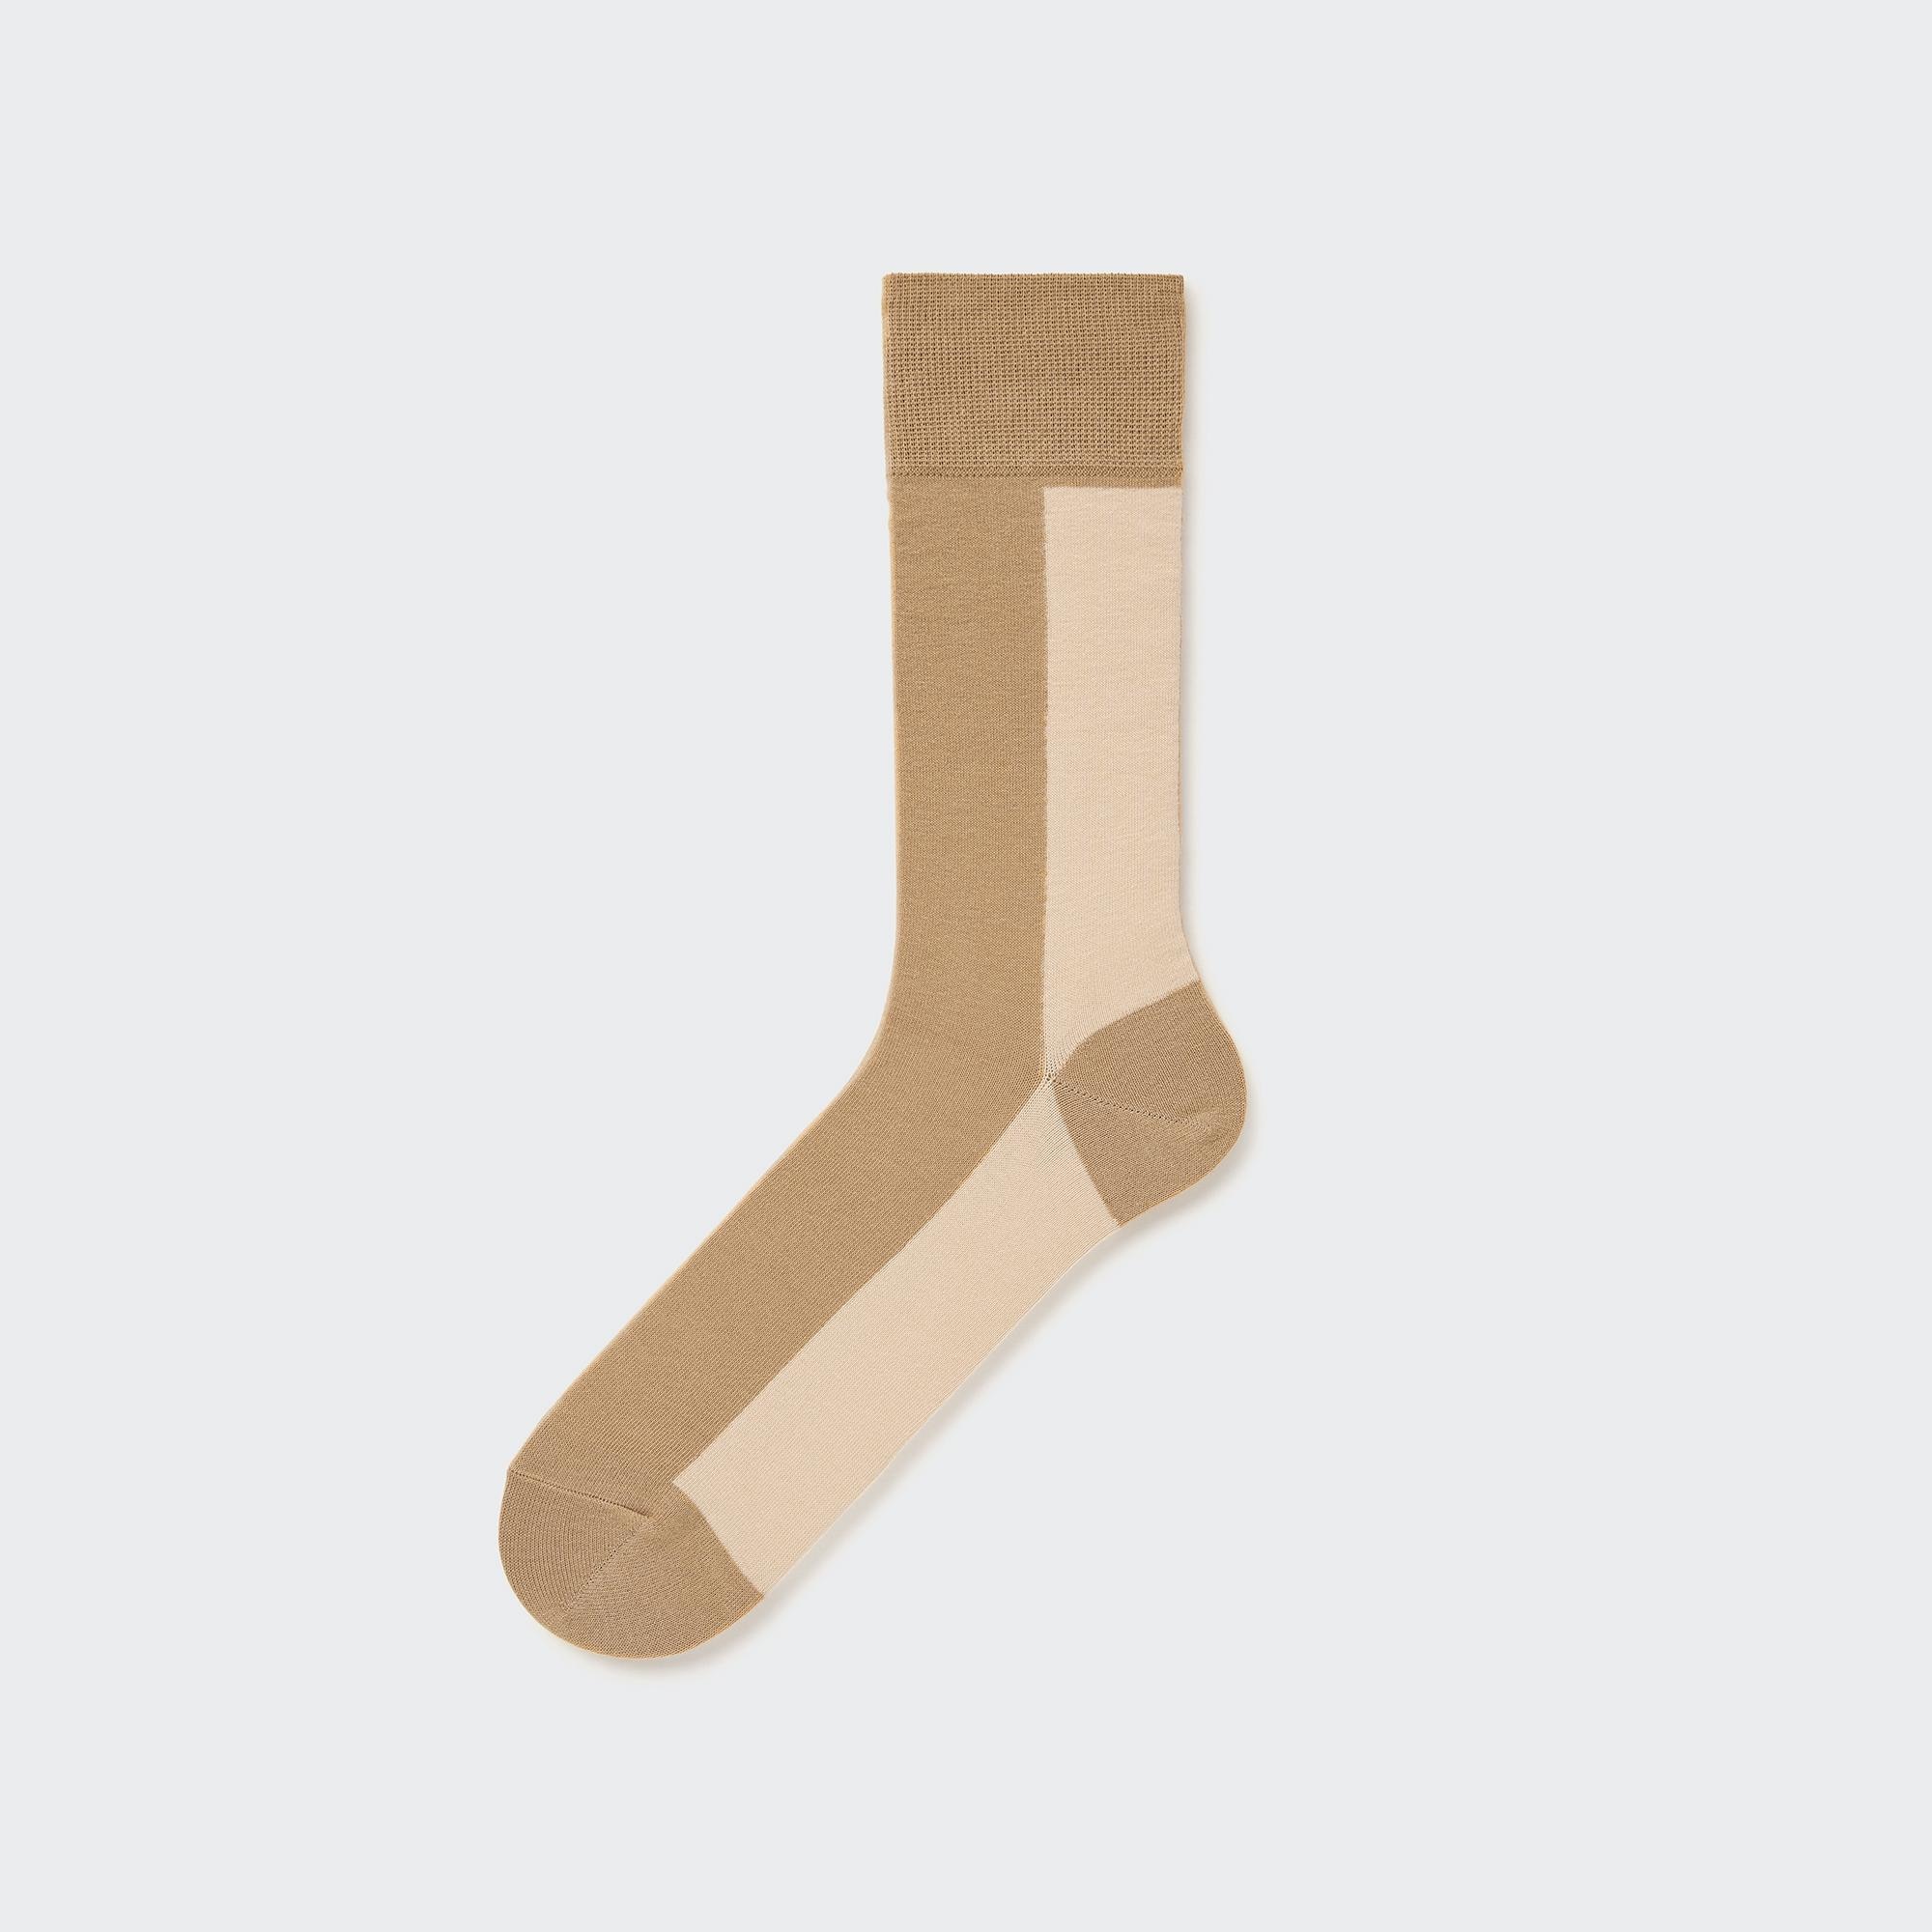 Mens SOCKSLEGGINGSAntimicrobial odorcontrolling  quick dryingUNIQLO  OFFICIAL ONLINE FLAGSHIP STORE